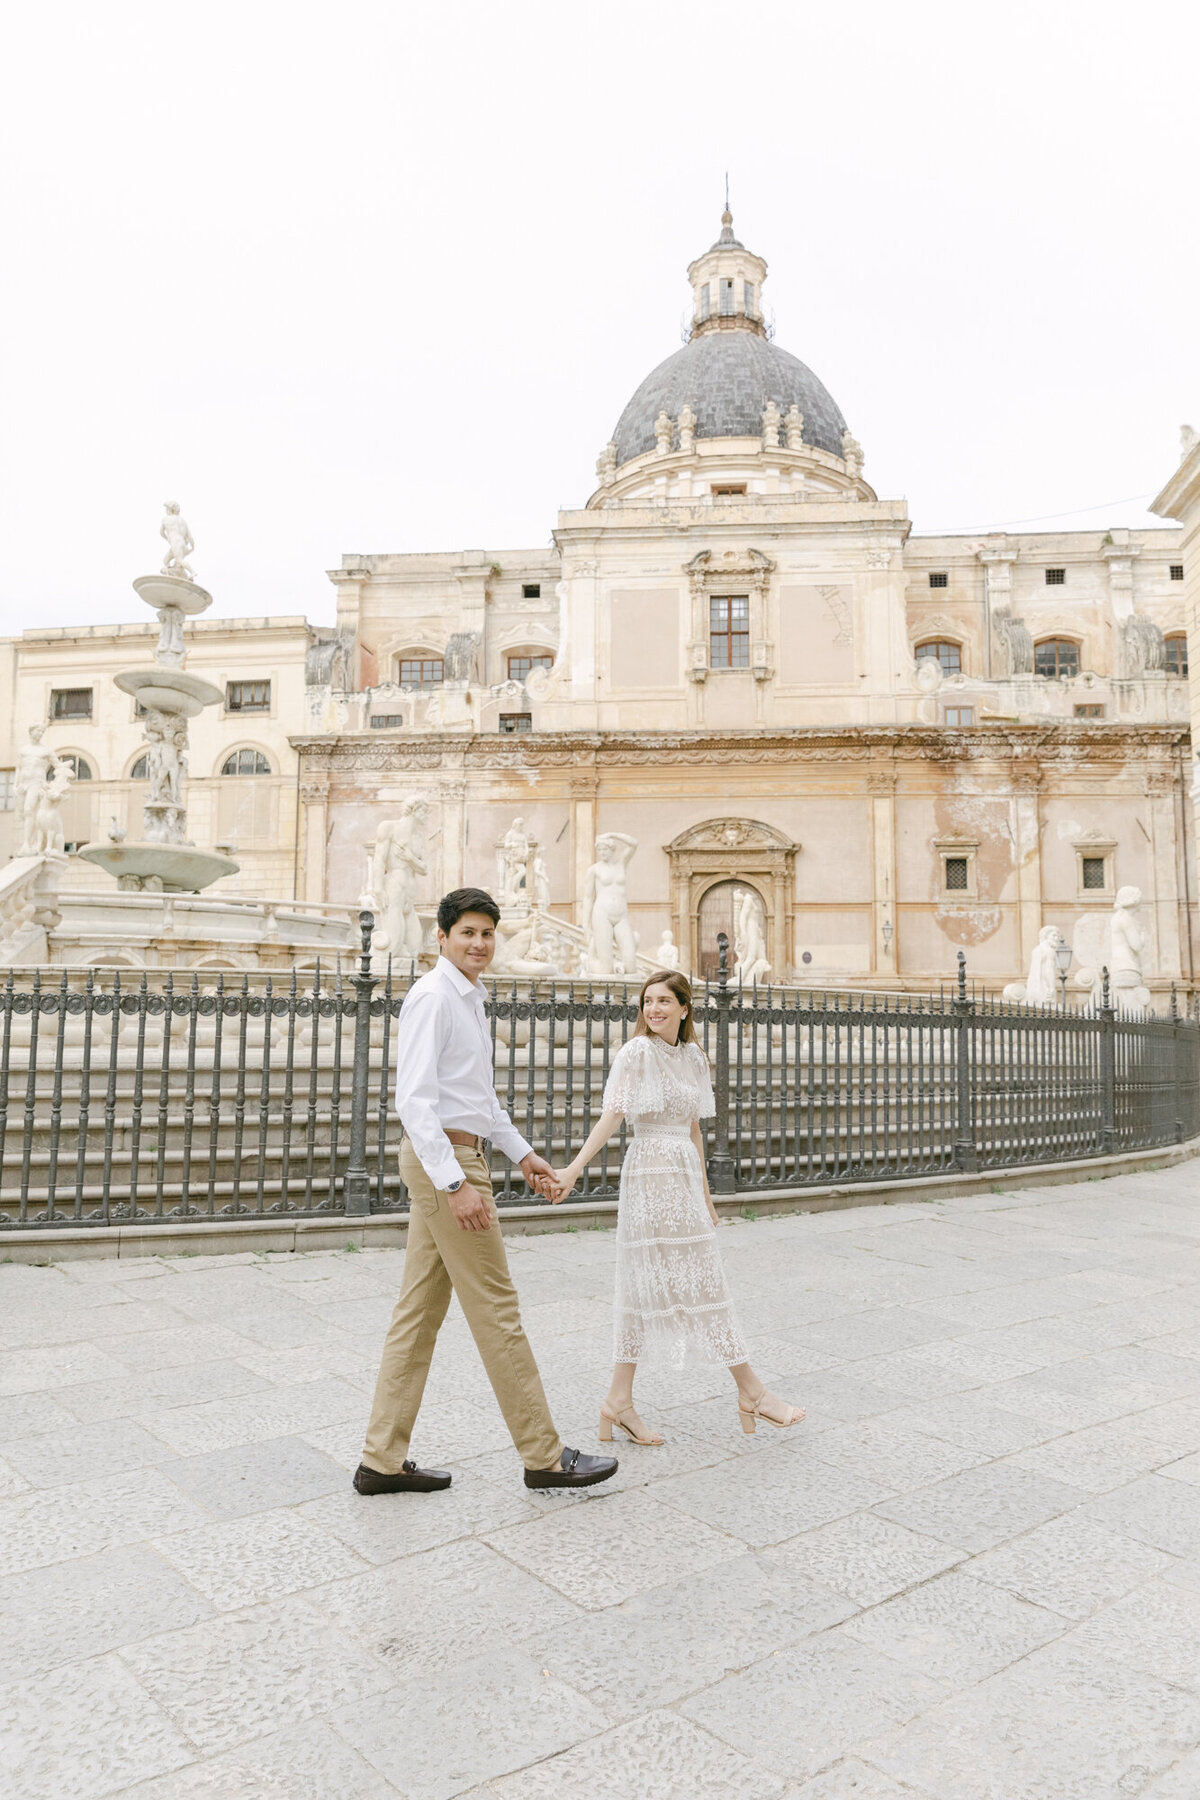 PERRUCCIPHOTO_PALERMO_SICILY_ENGAGEMENT_14